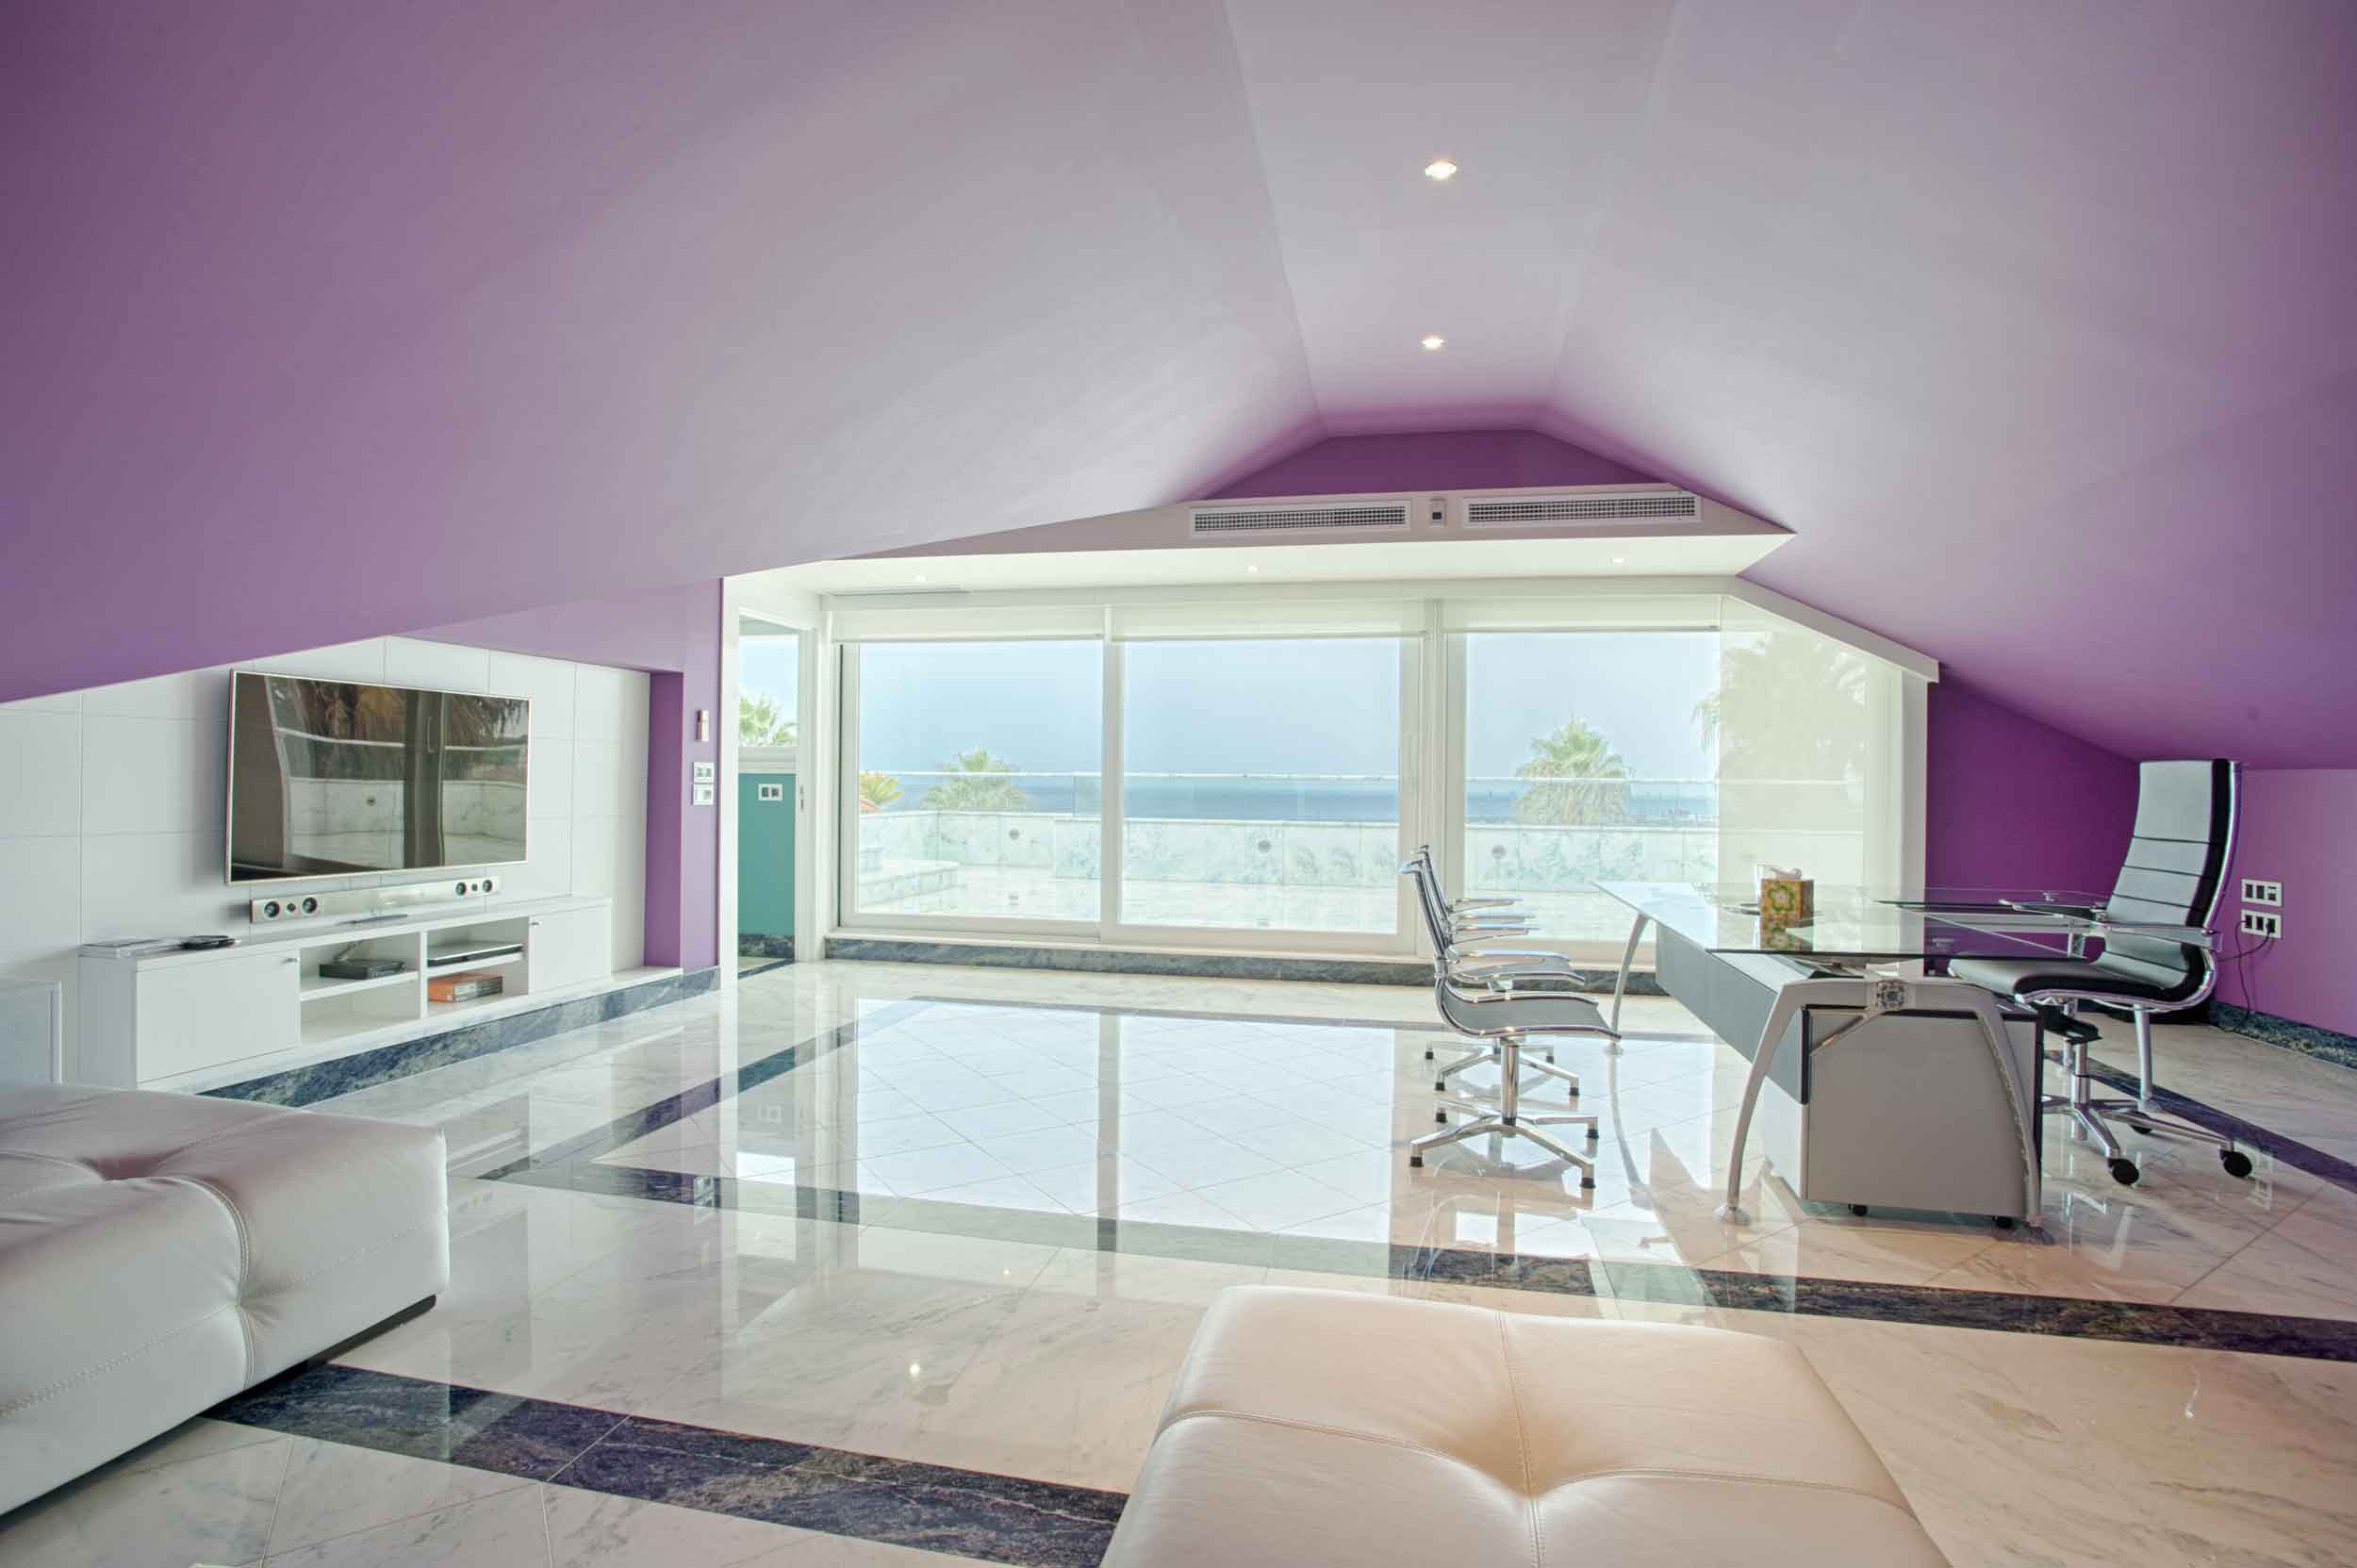 This five-story residence on the southern coast of Portugal is vividly decorated throughout. The lower-level office has a bright purple palette, which creates contrast with the alluring views of sea and sky.